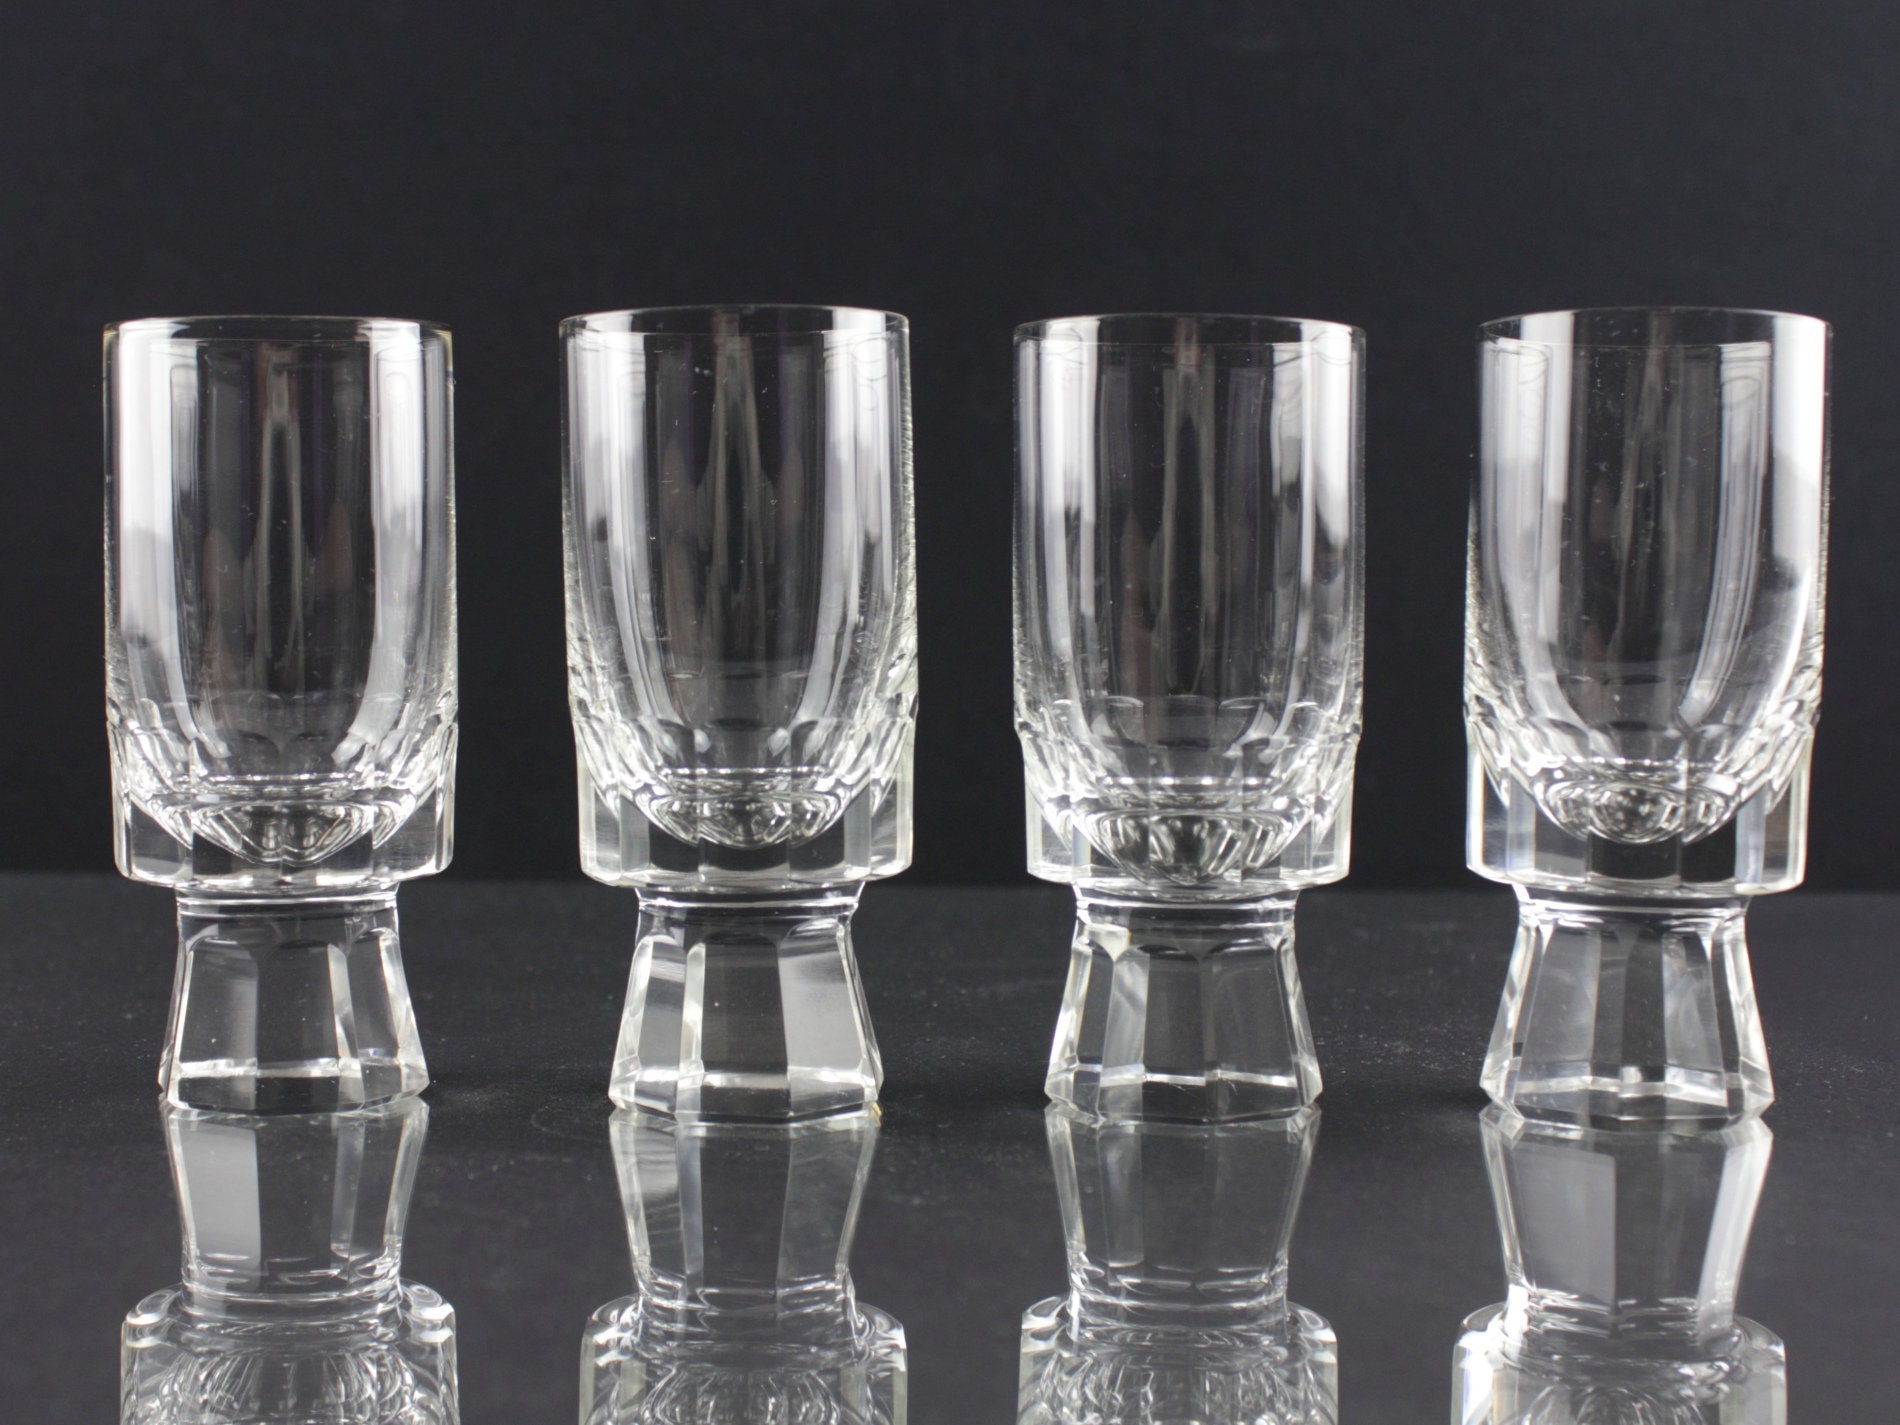 Contemporary Crystal shot glasses from TWIST Collection by Veritable